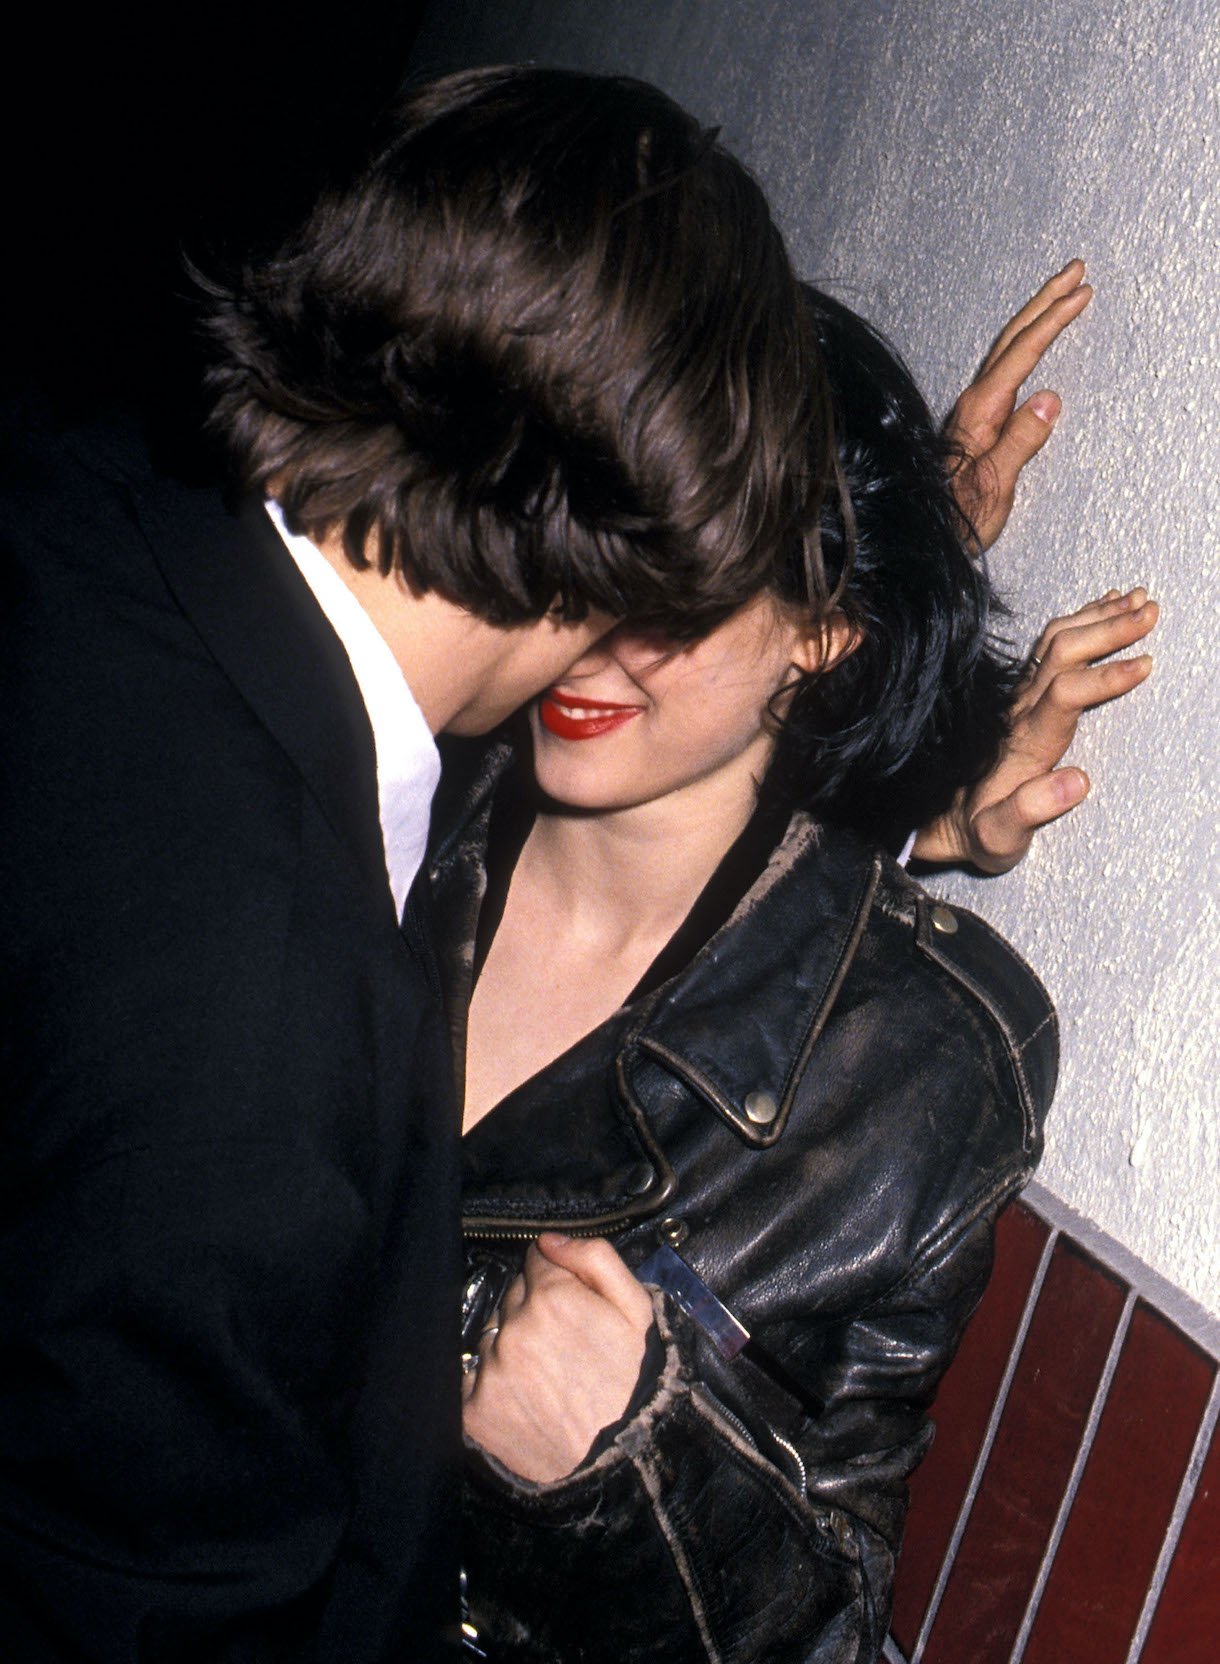 Actor Johnny Depp and actress Winona Ryder in 1990